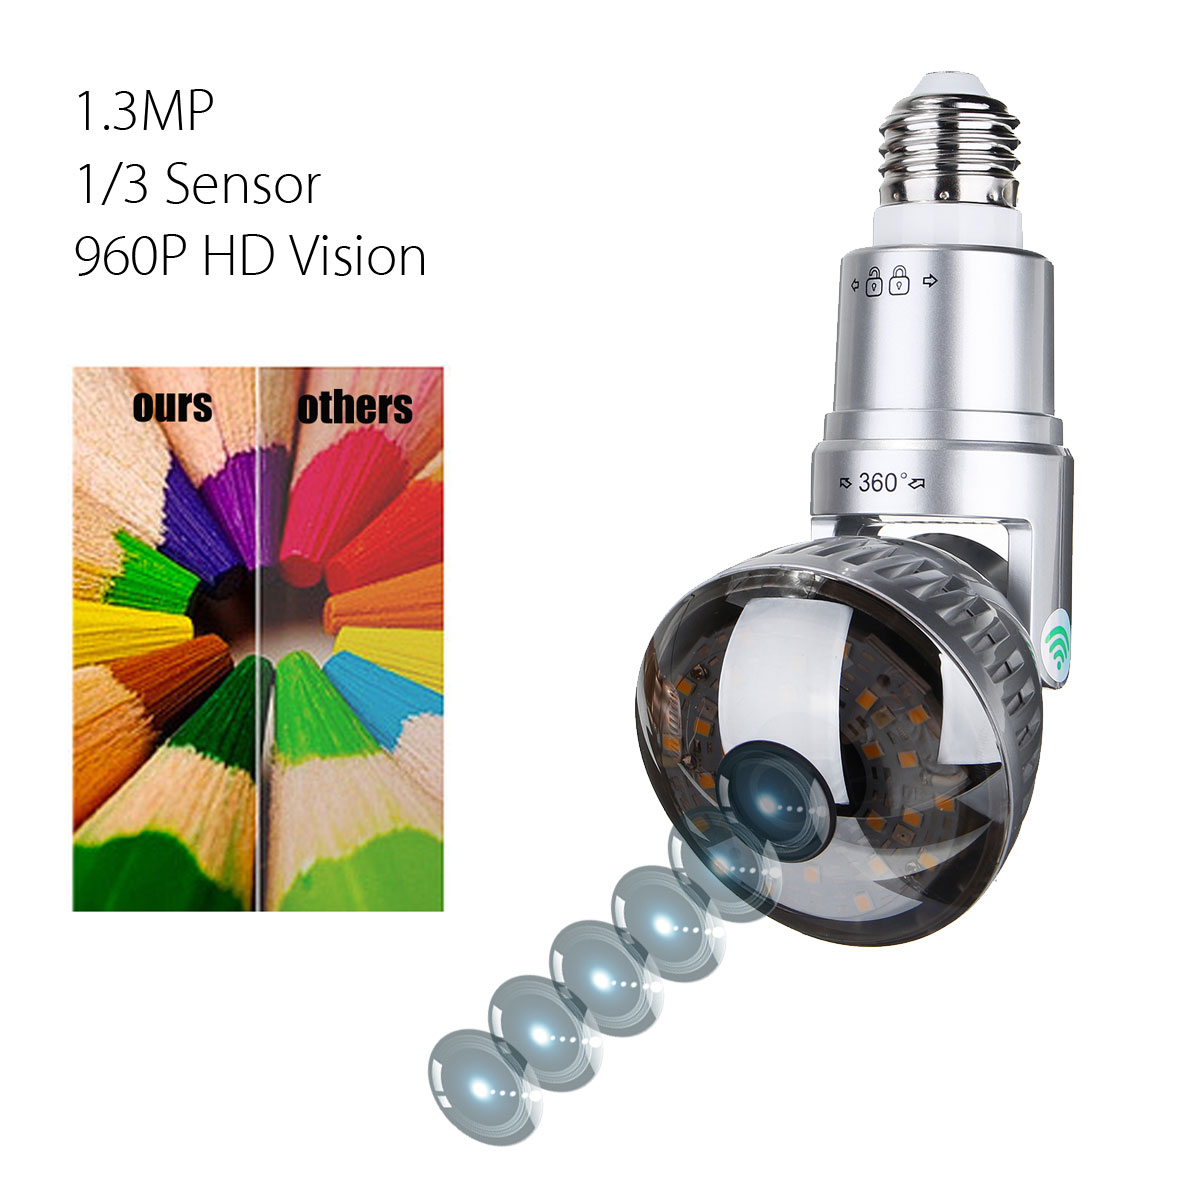 3.6mm Wireless Mirror Bulb Security Camera DVR WIFI LED Light IP Camera Motion Detection 19